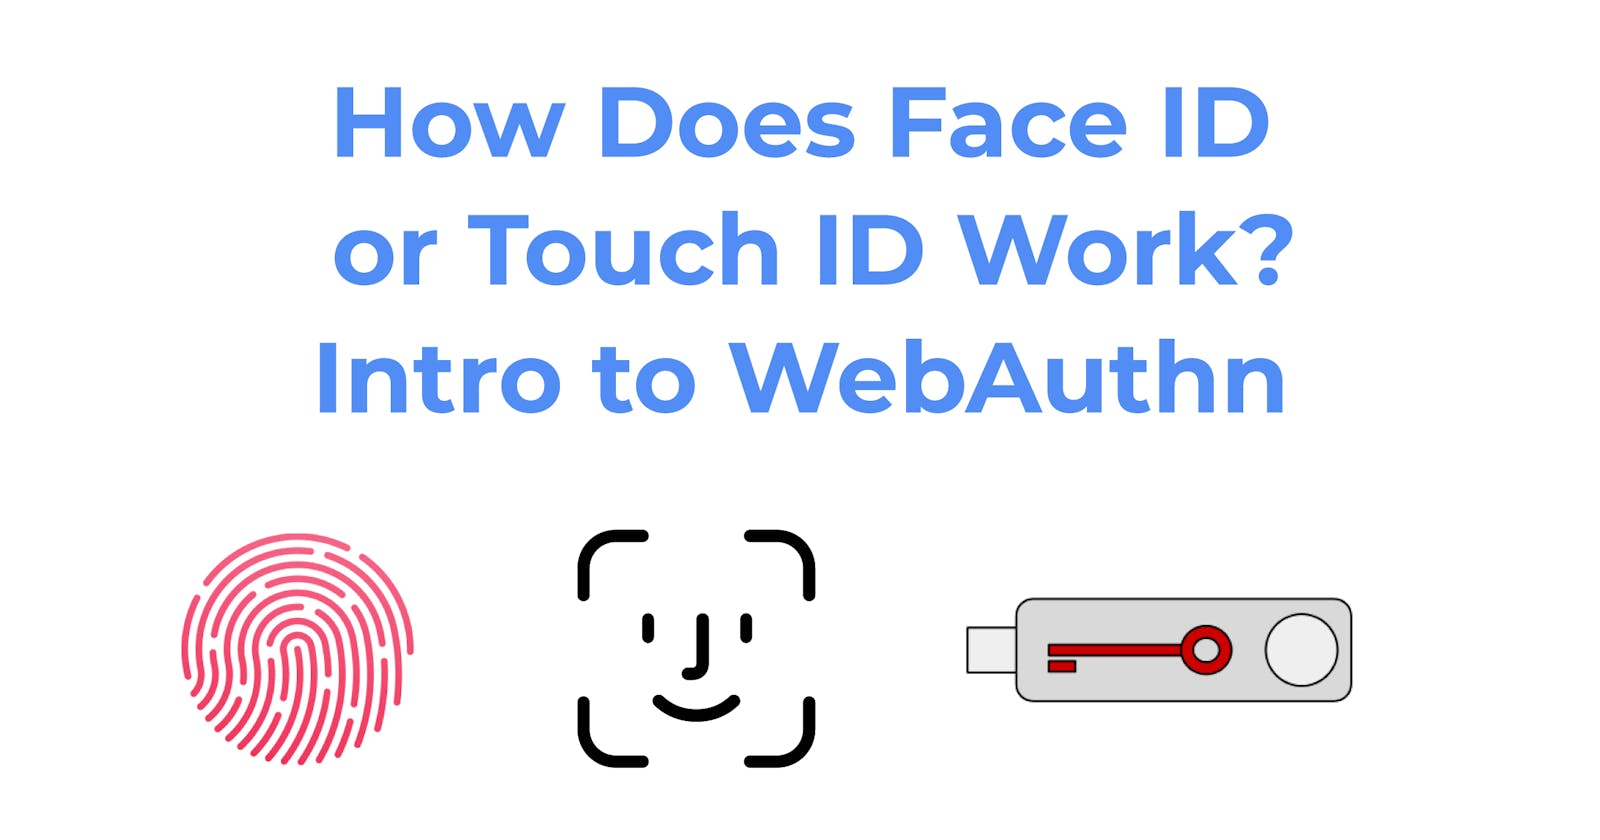 How Does Face ID or Touch ID Work? Intro to WebAuthn